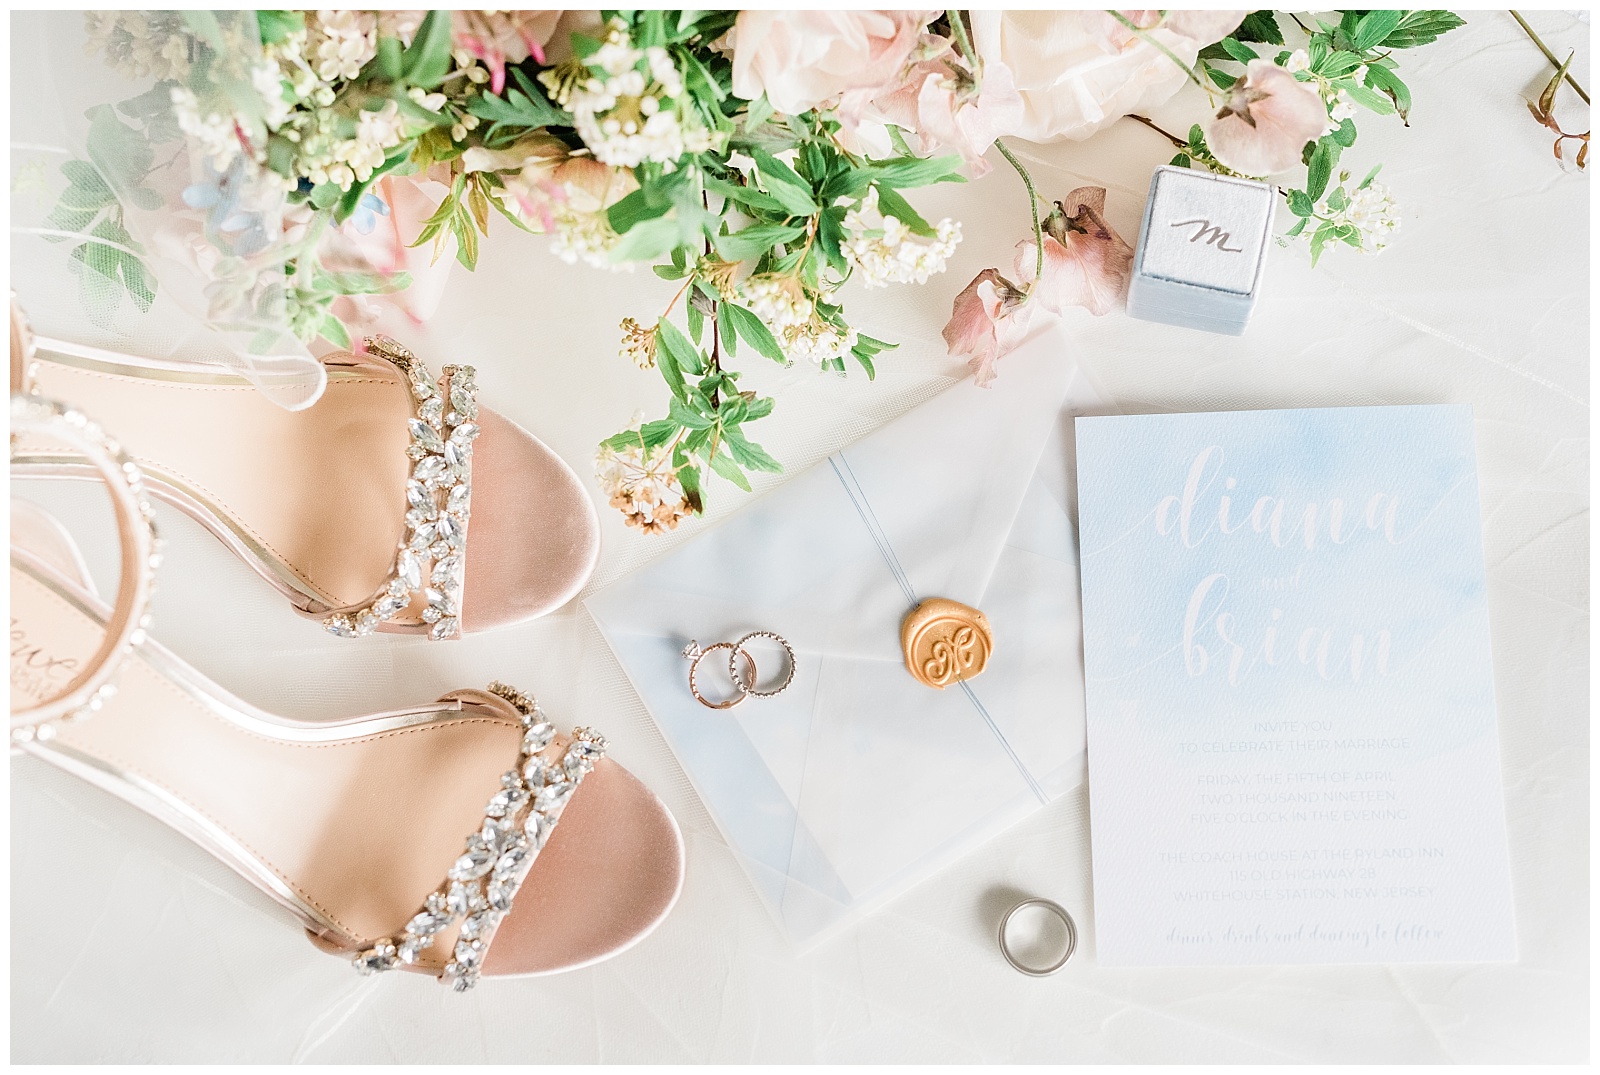 Blue watercolor invitation suite styled with shoes and bouquet.